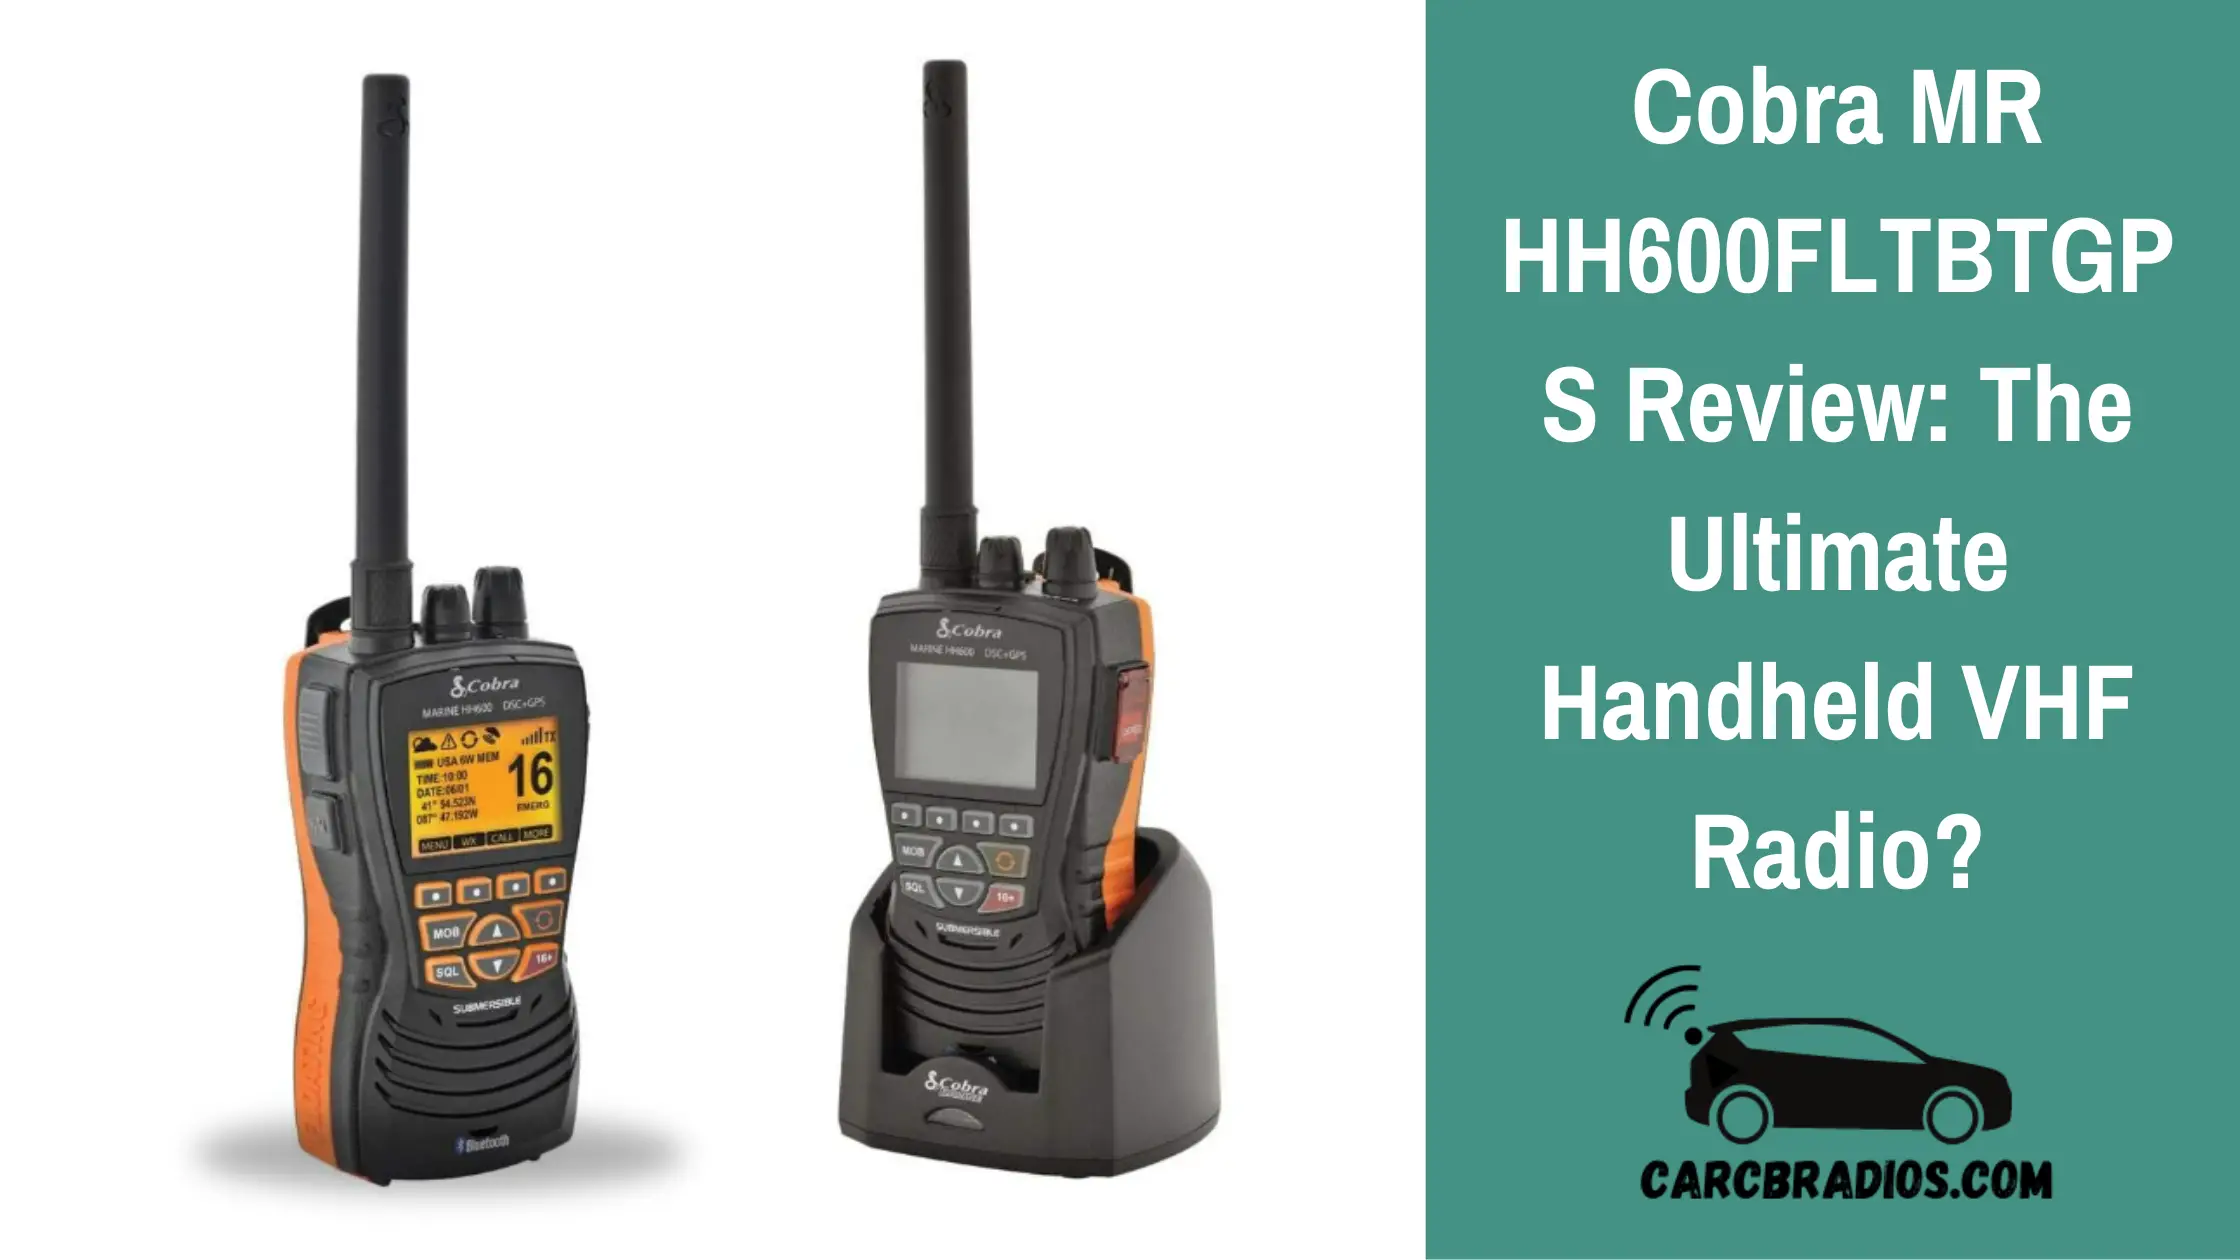 When it comes to marine radios, the Cobra MR HH600FLTBTGPS Handheld Floating VHF Radio is a top-of-the-line option.